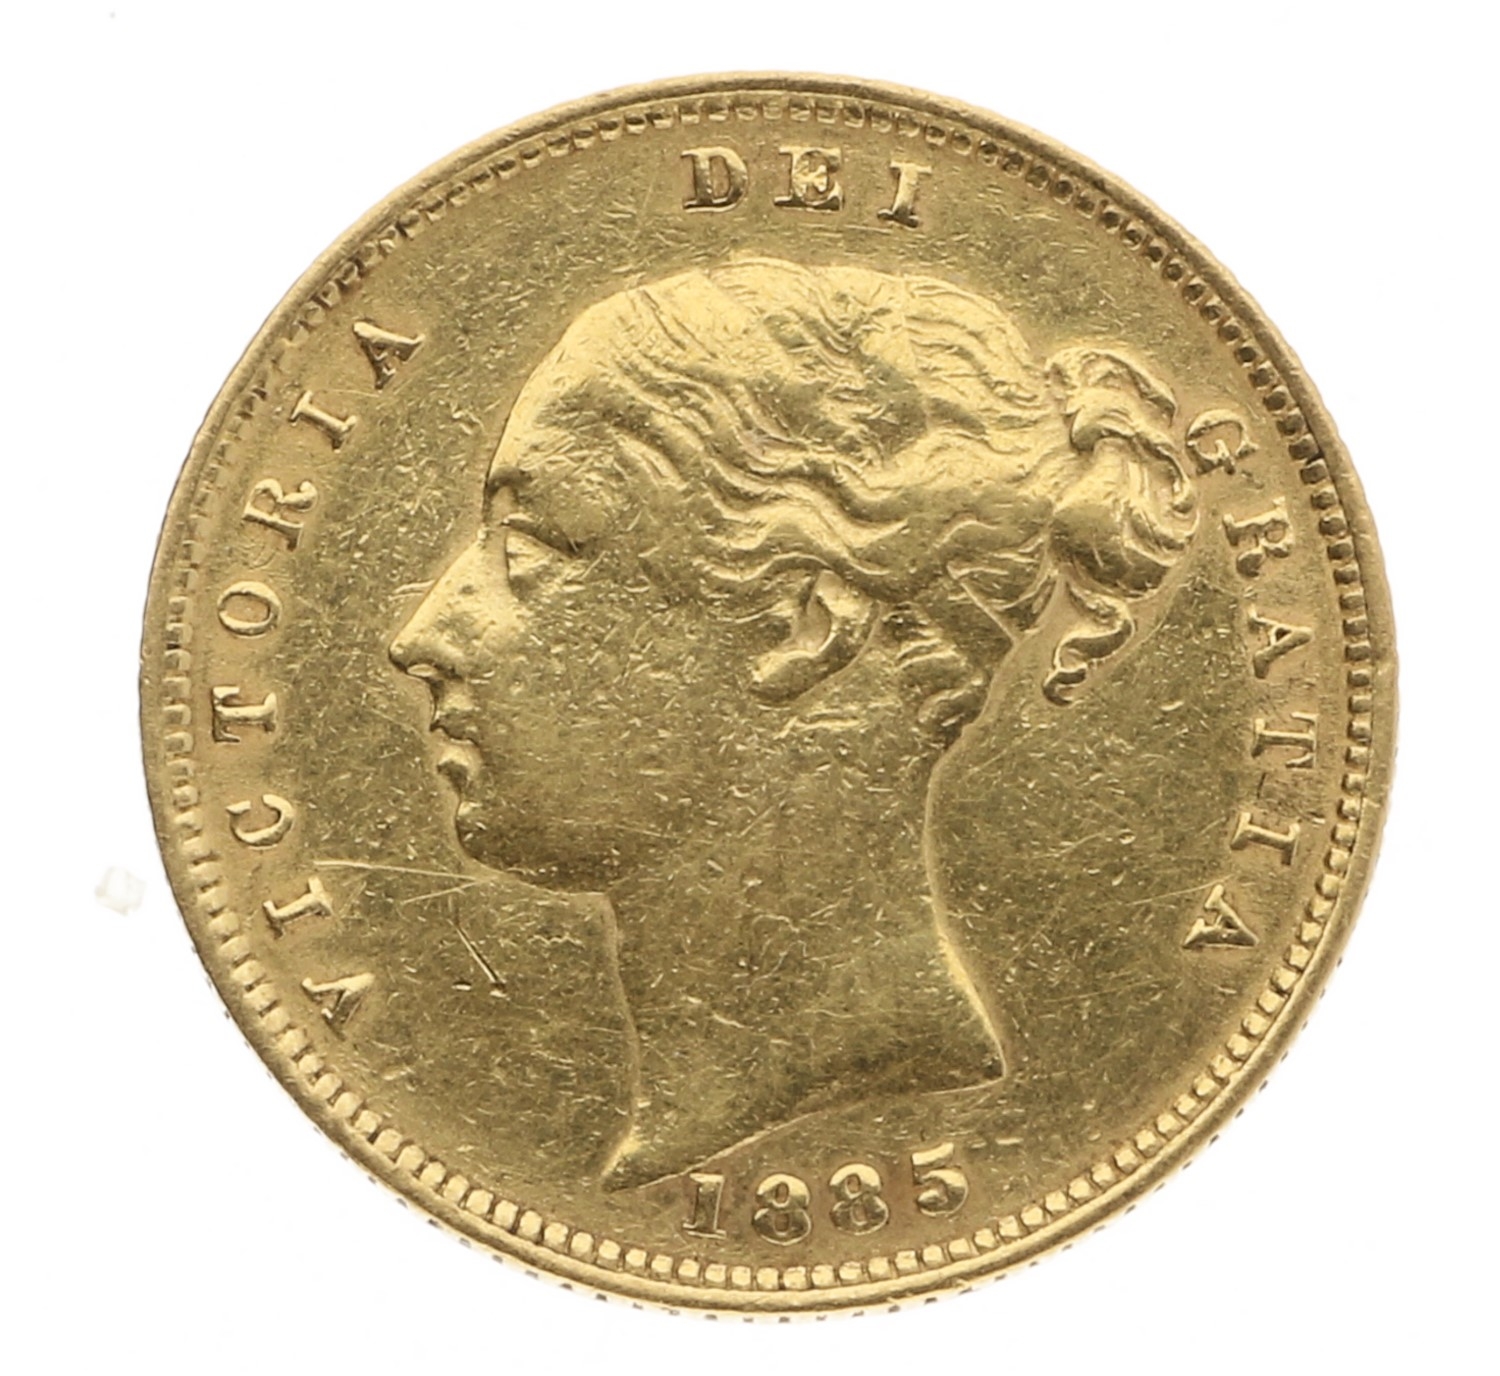 1/2 Sovereign  - Great Britain - 1885